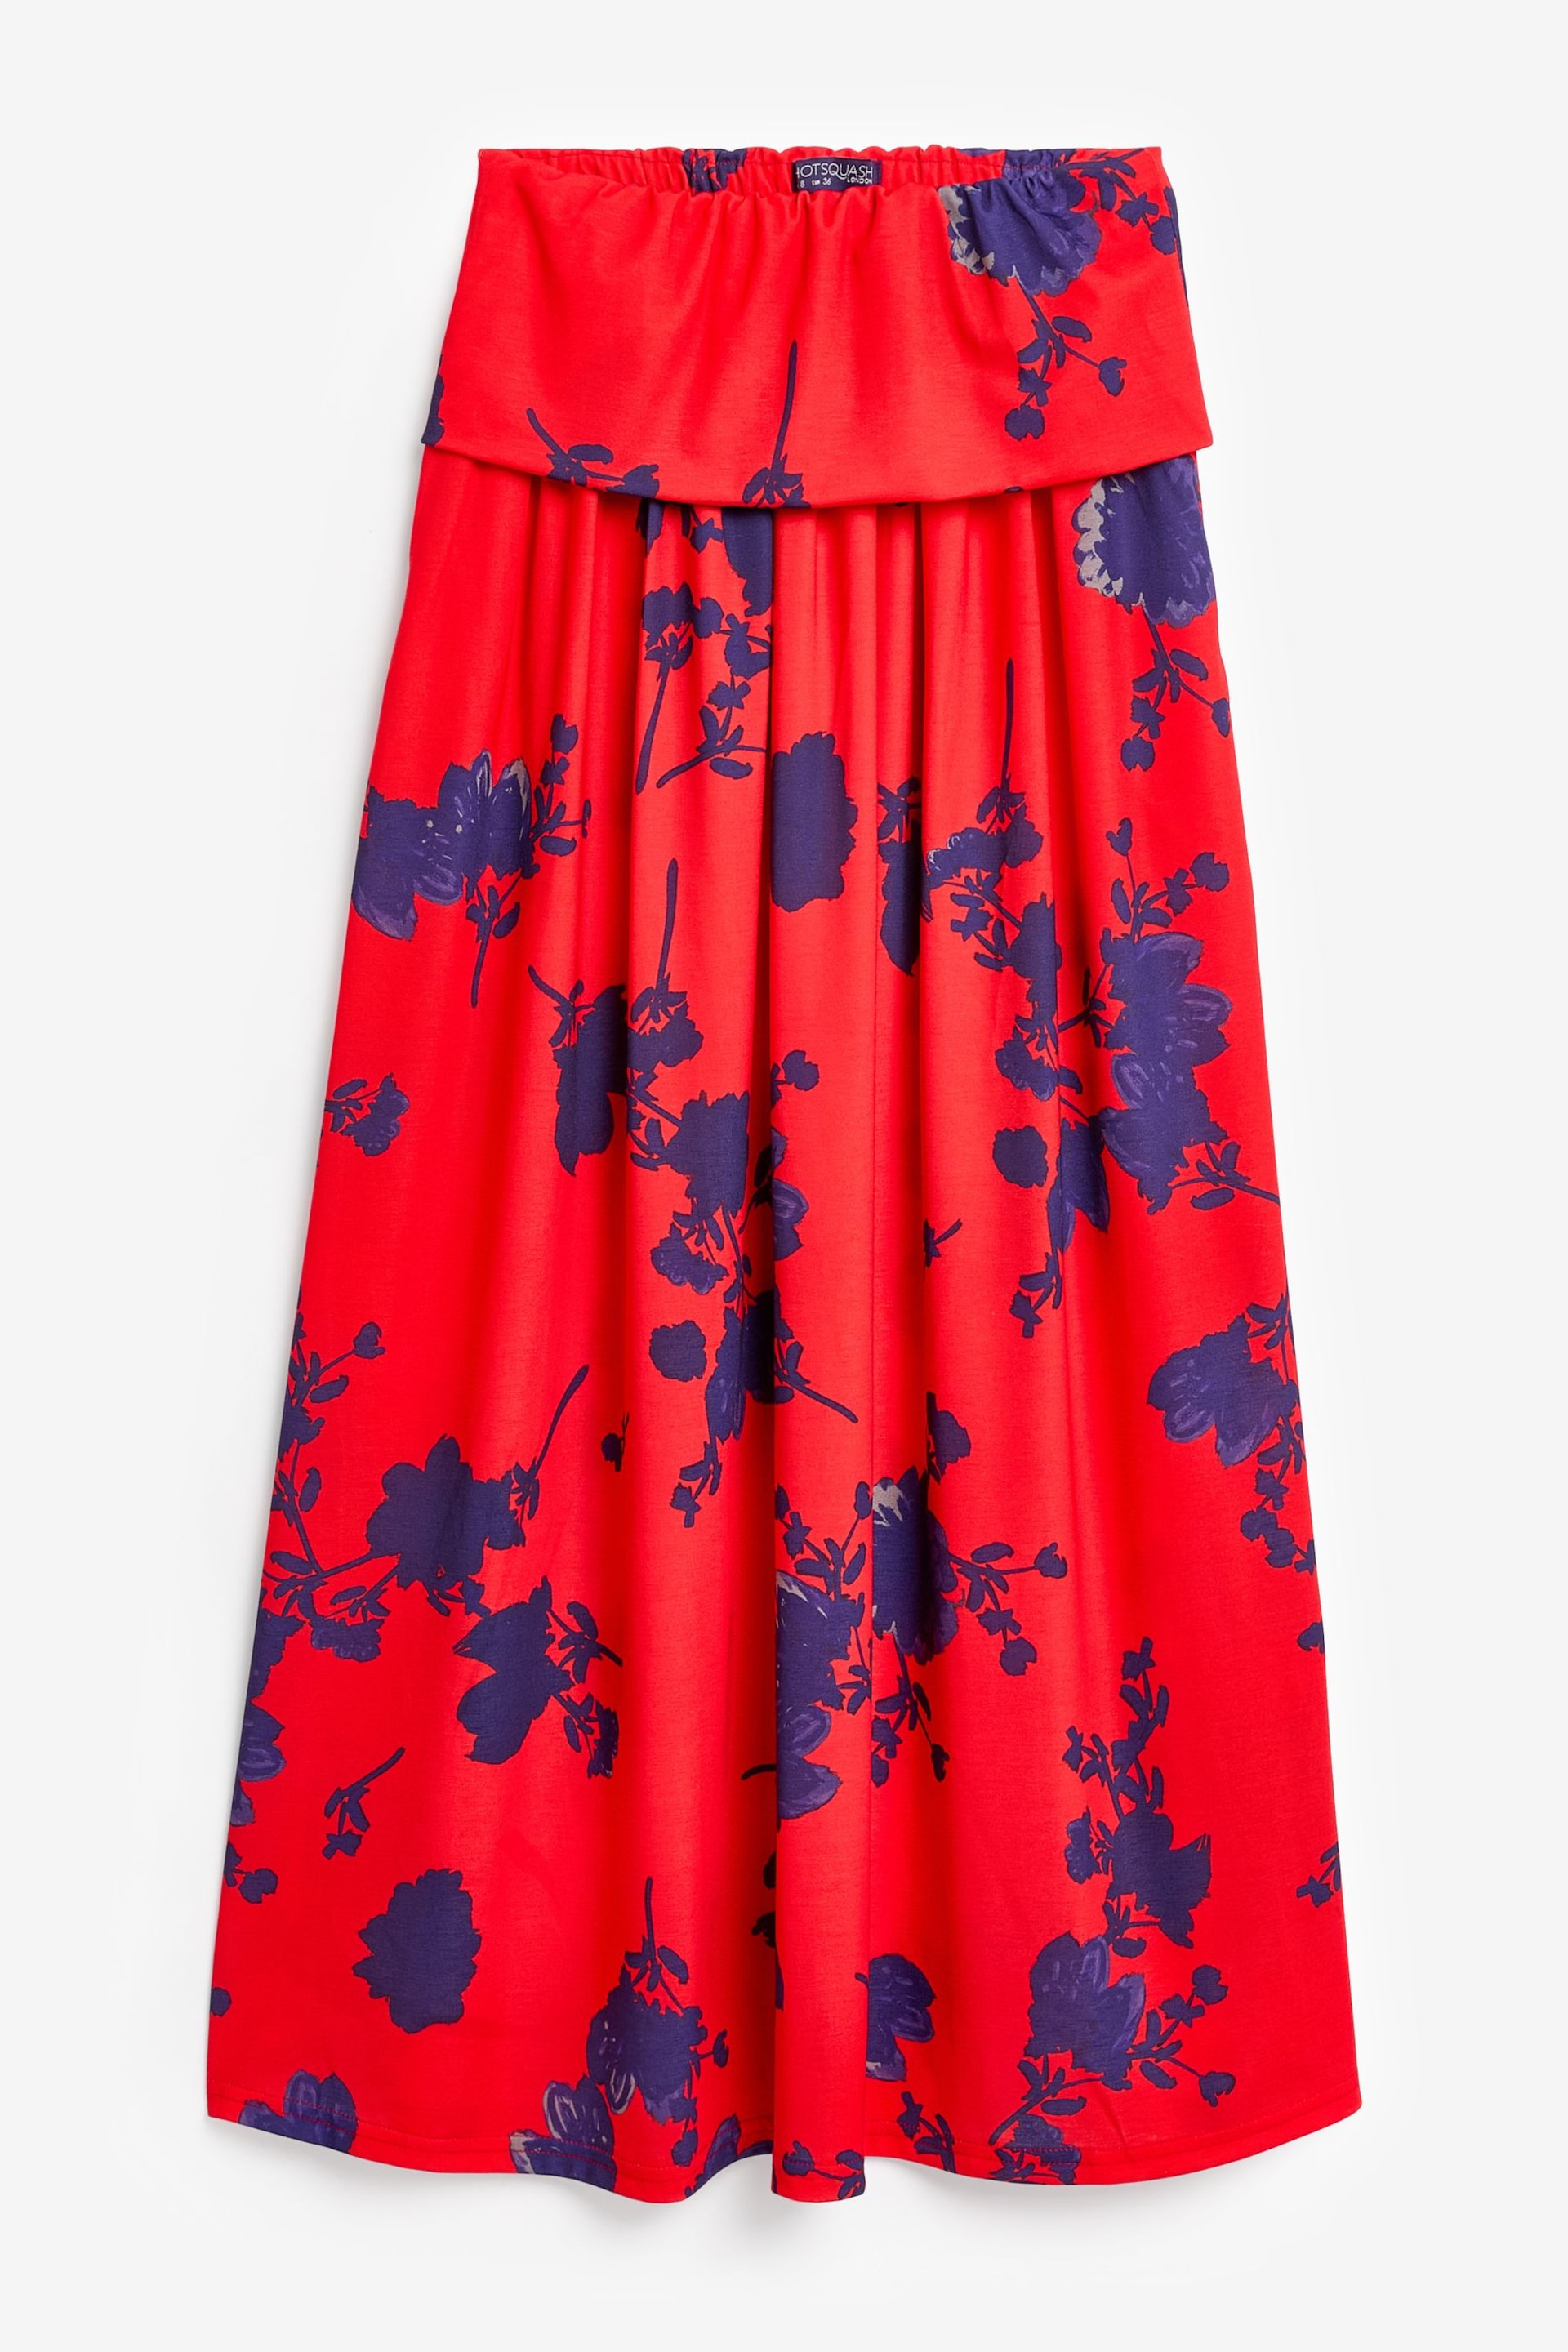 Hot Squash Red Roll Top Maxi Skirts - Image 3 of 3